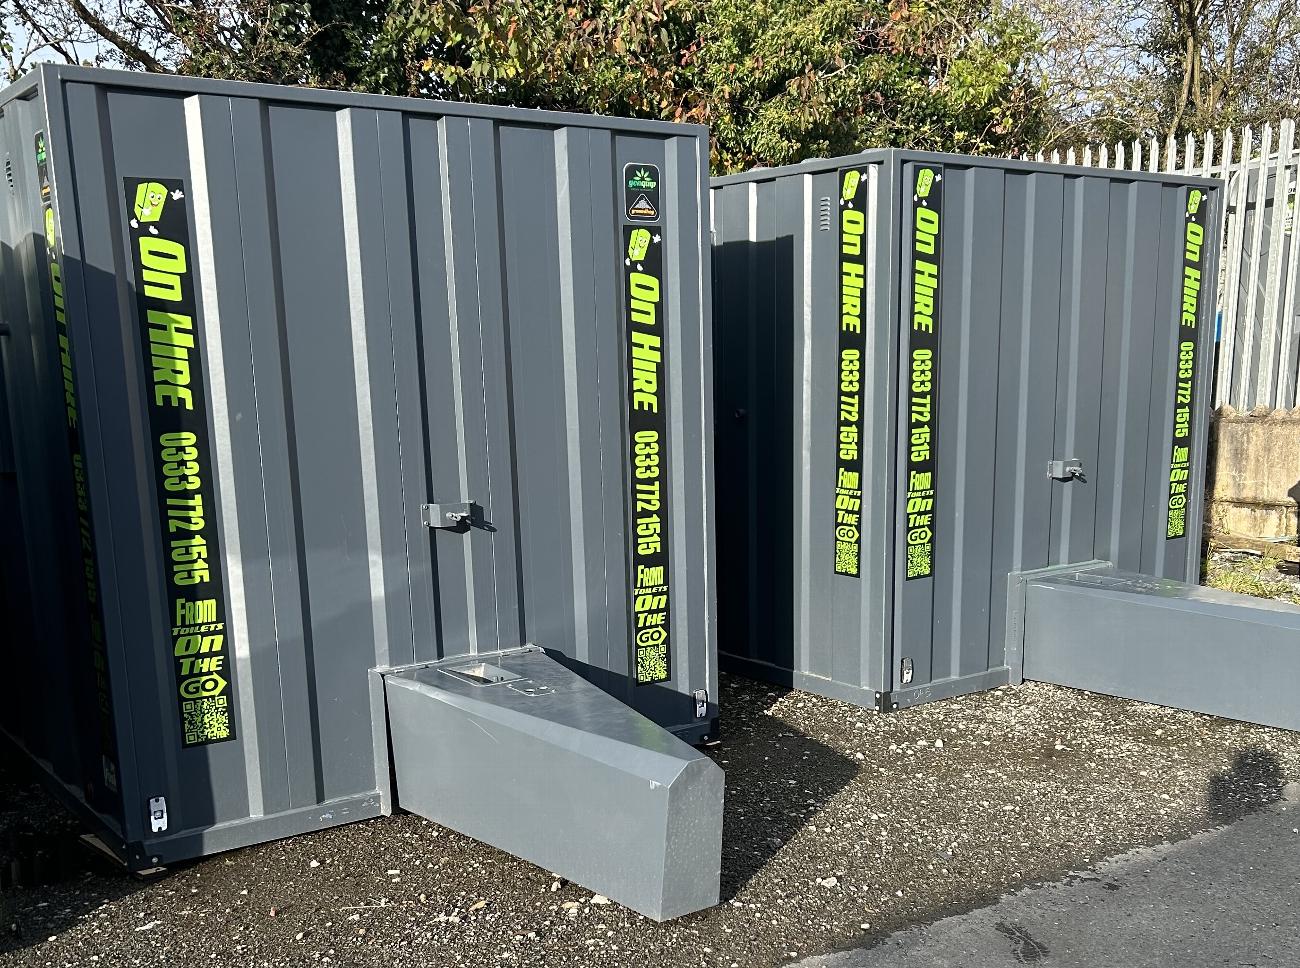 Gallery | Portable Toilet Loo Hire Rental Company in North West uk and Manchester gallery image 13